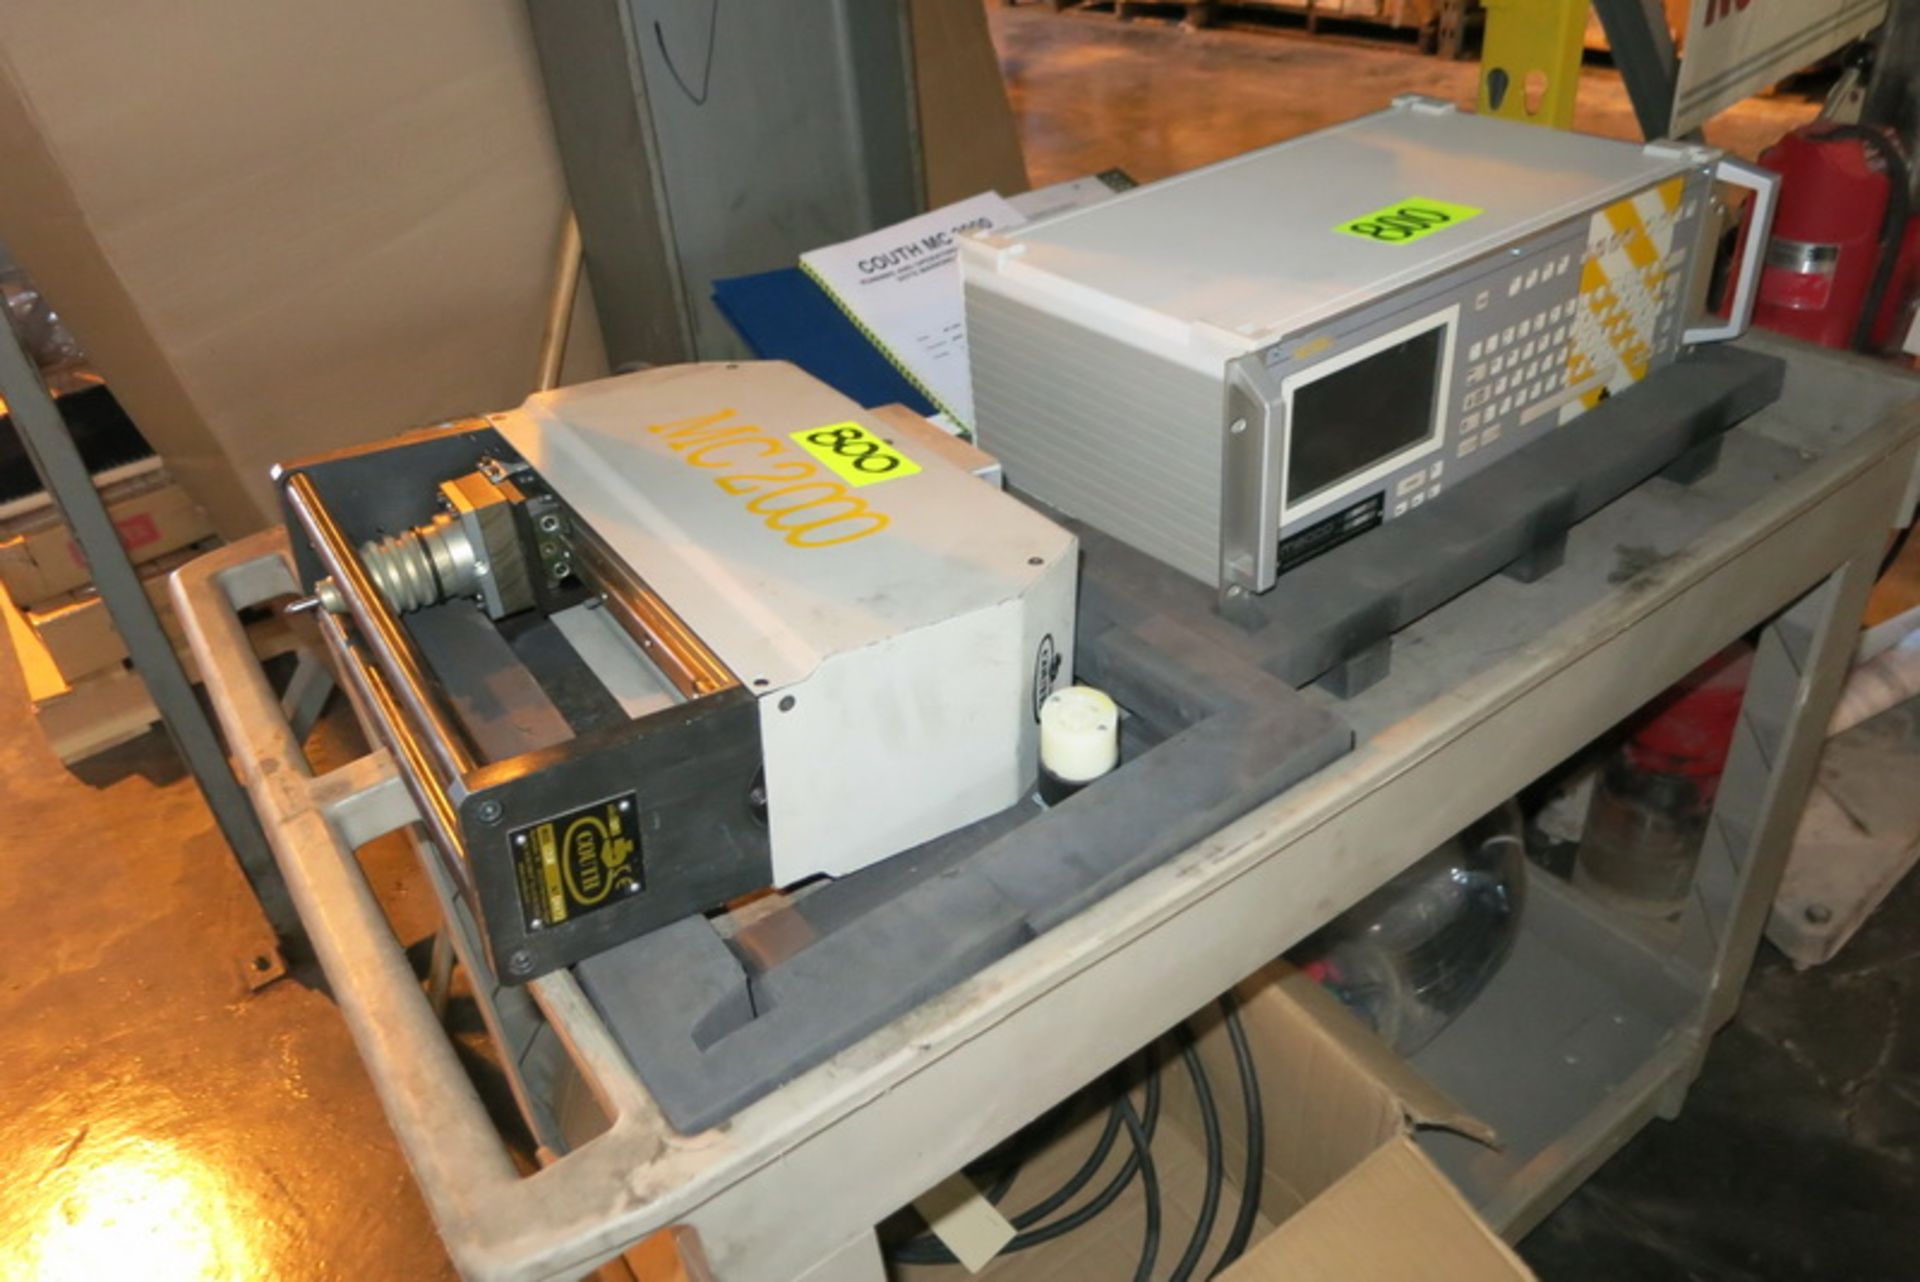 Mecco compact dot peen marking machine, model Couth MC2000, unit 200X35N4 with control box, s/n